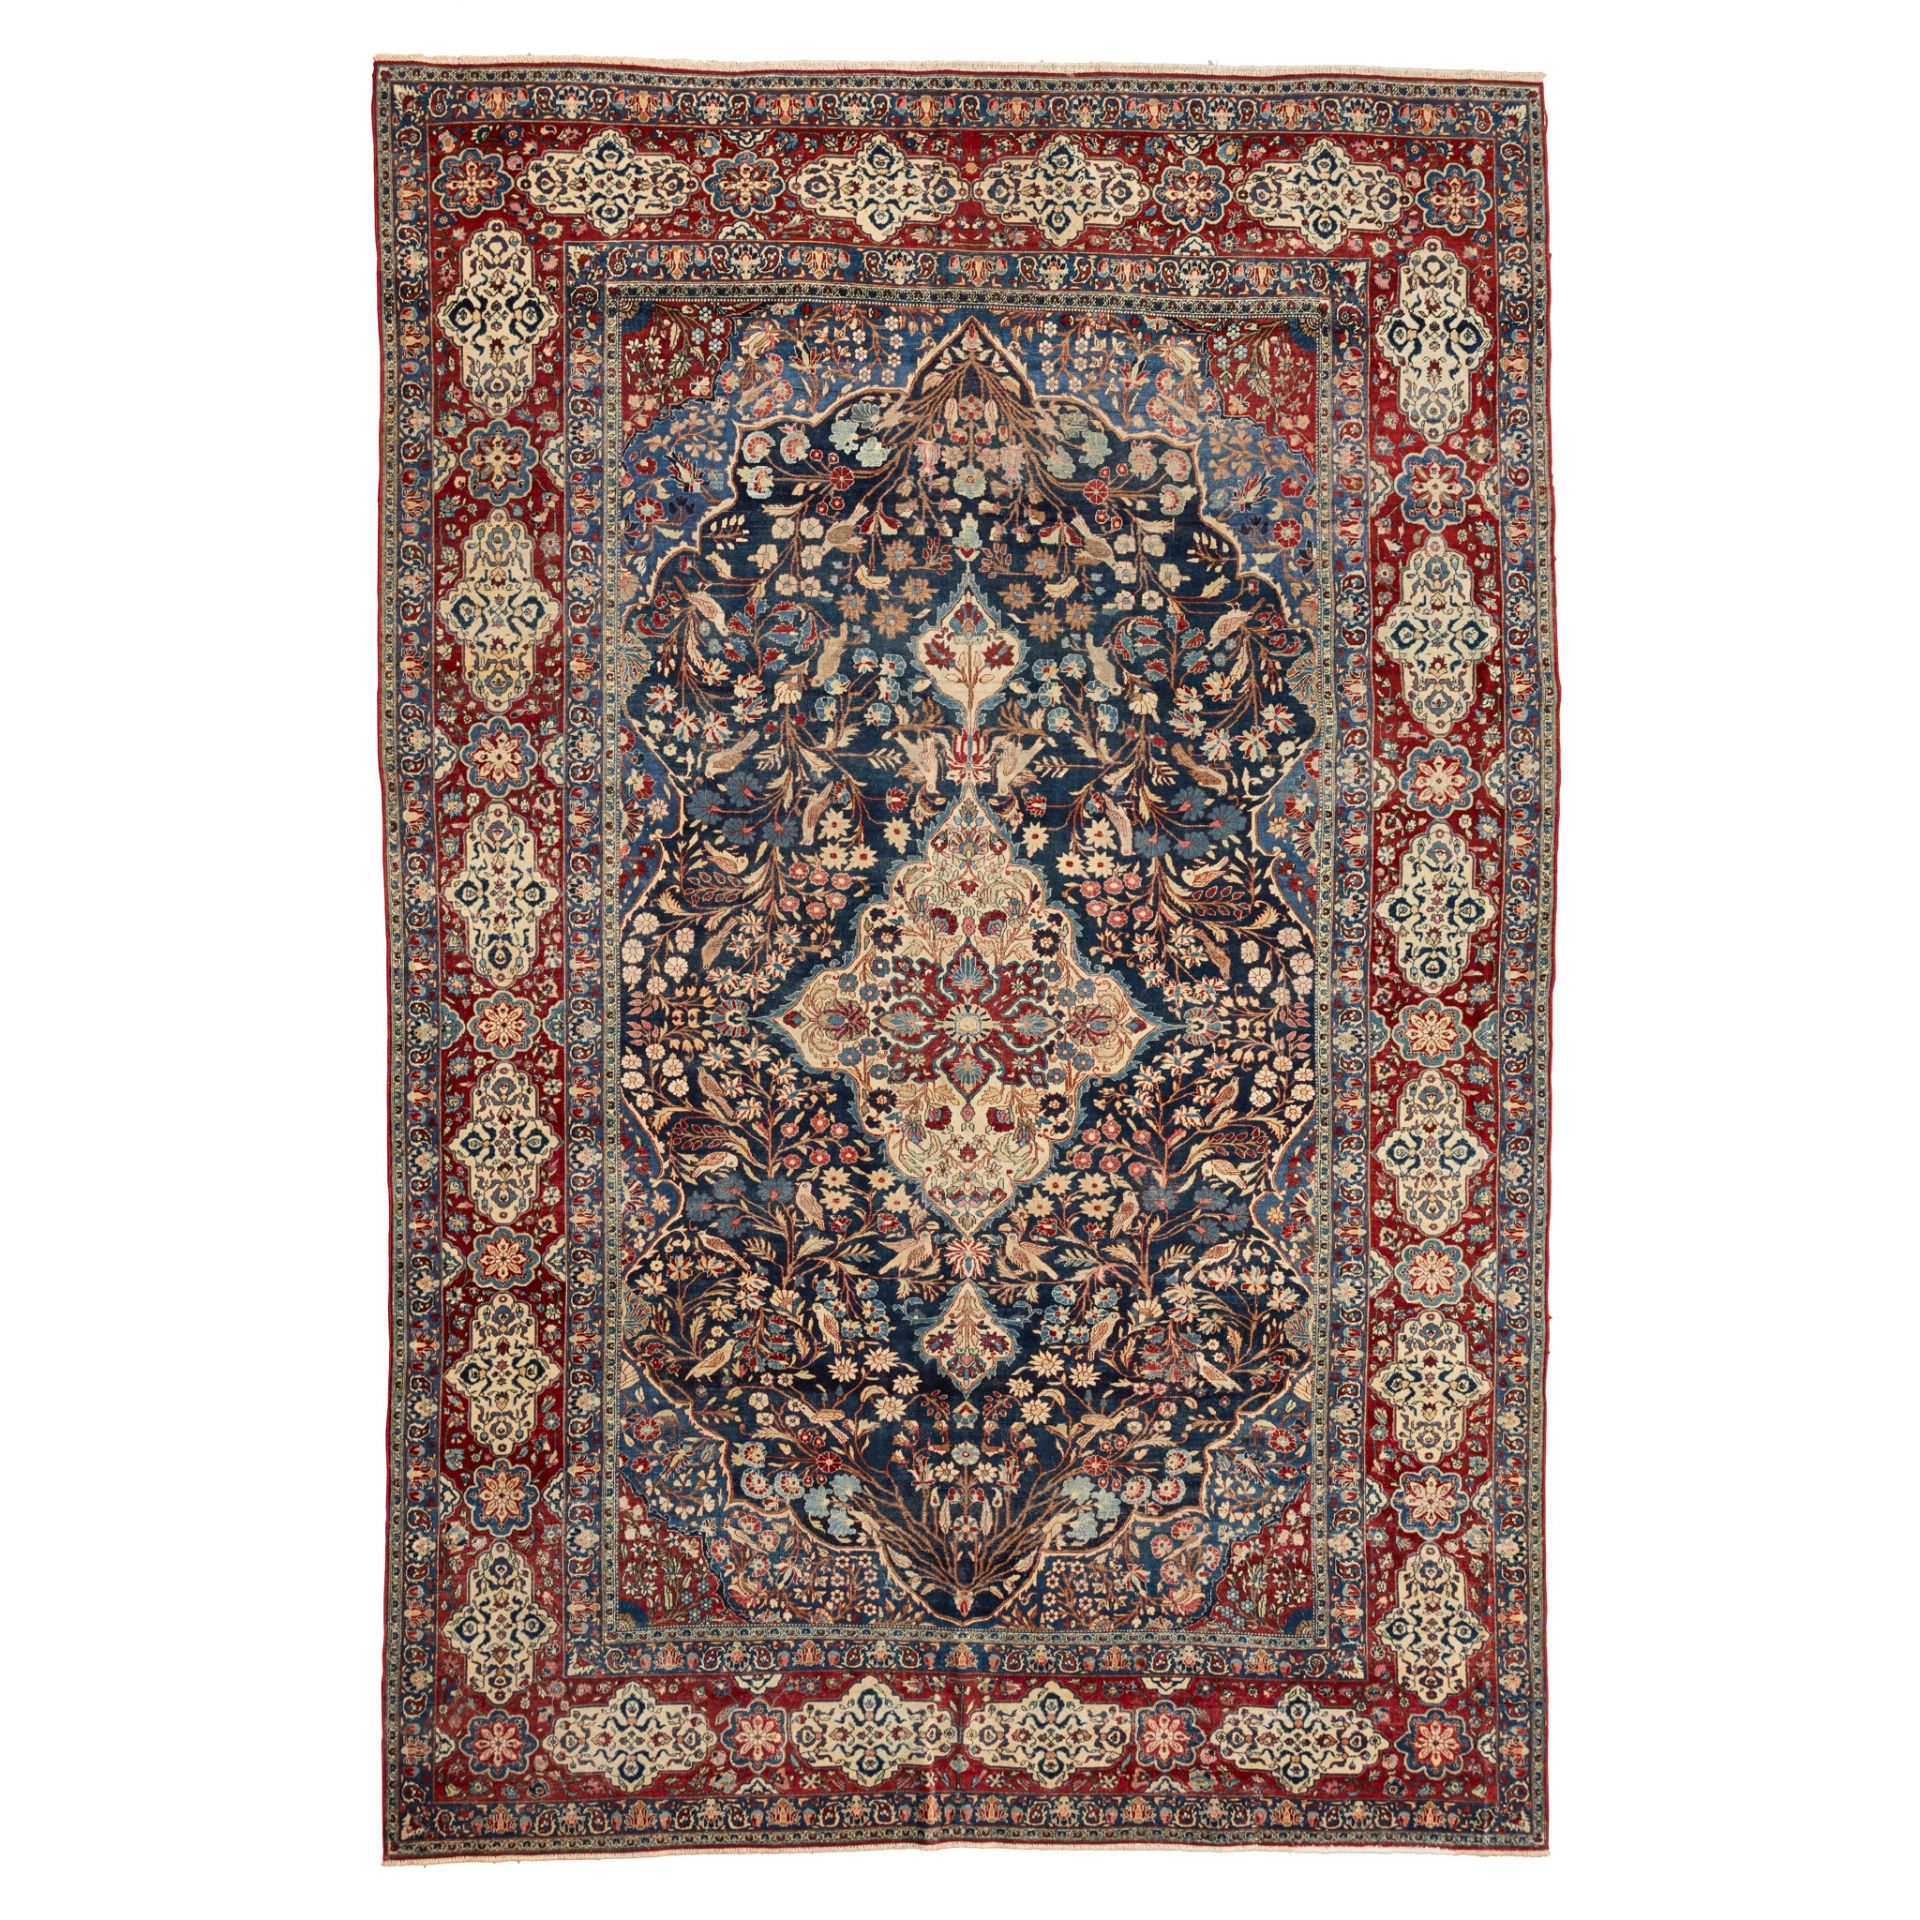 ISFAHAN PART SILK CARPET CENTRAL PERSIA, LATE 19TH/EARLY 20TH CENTURY